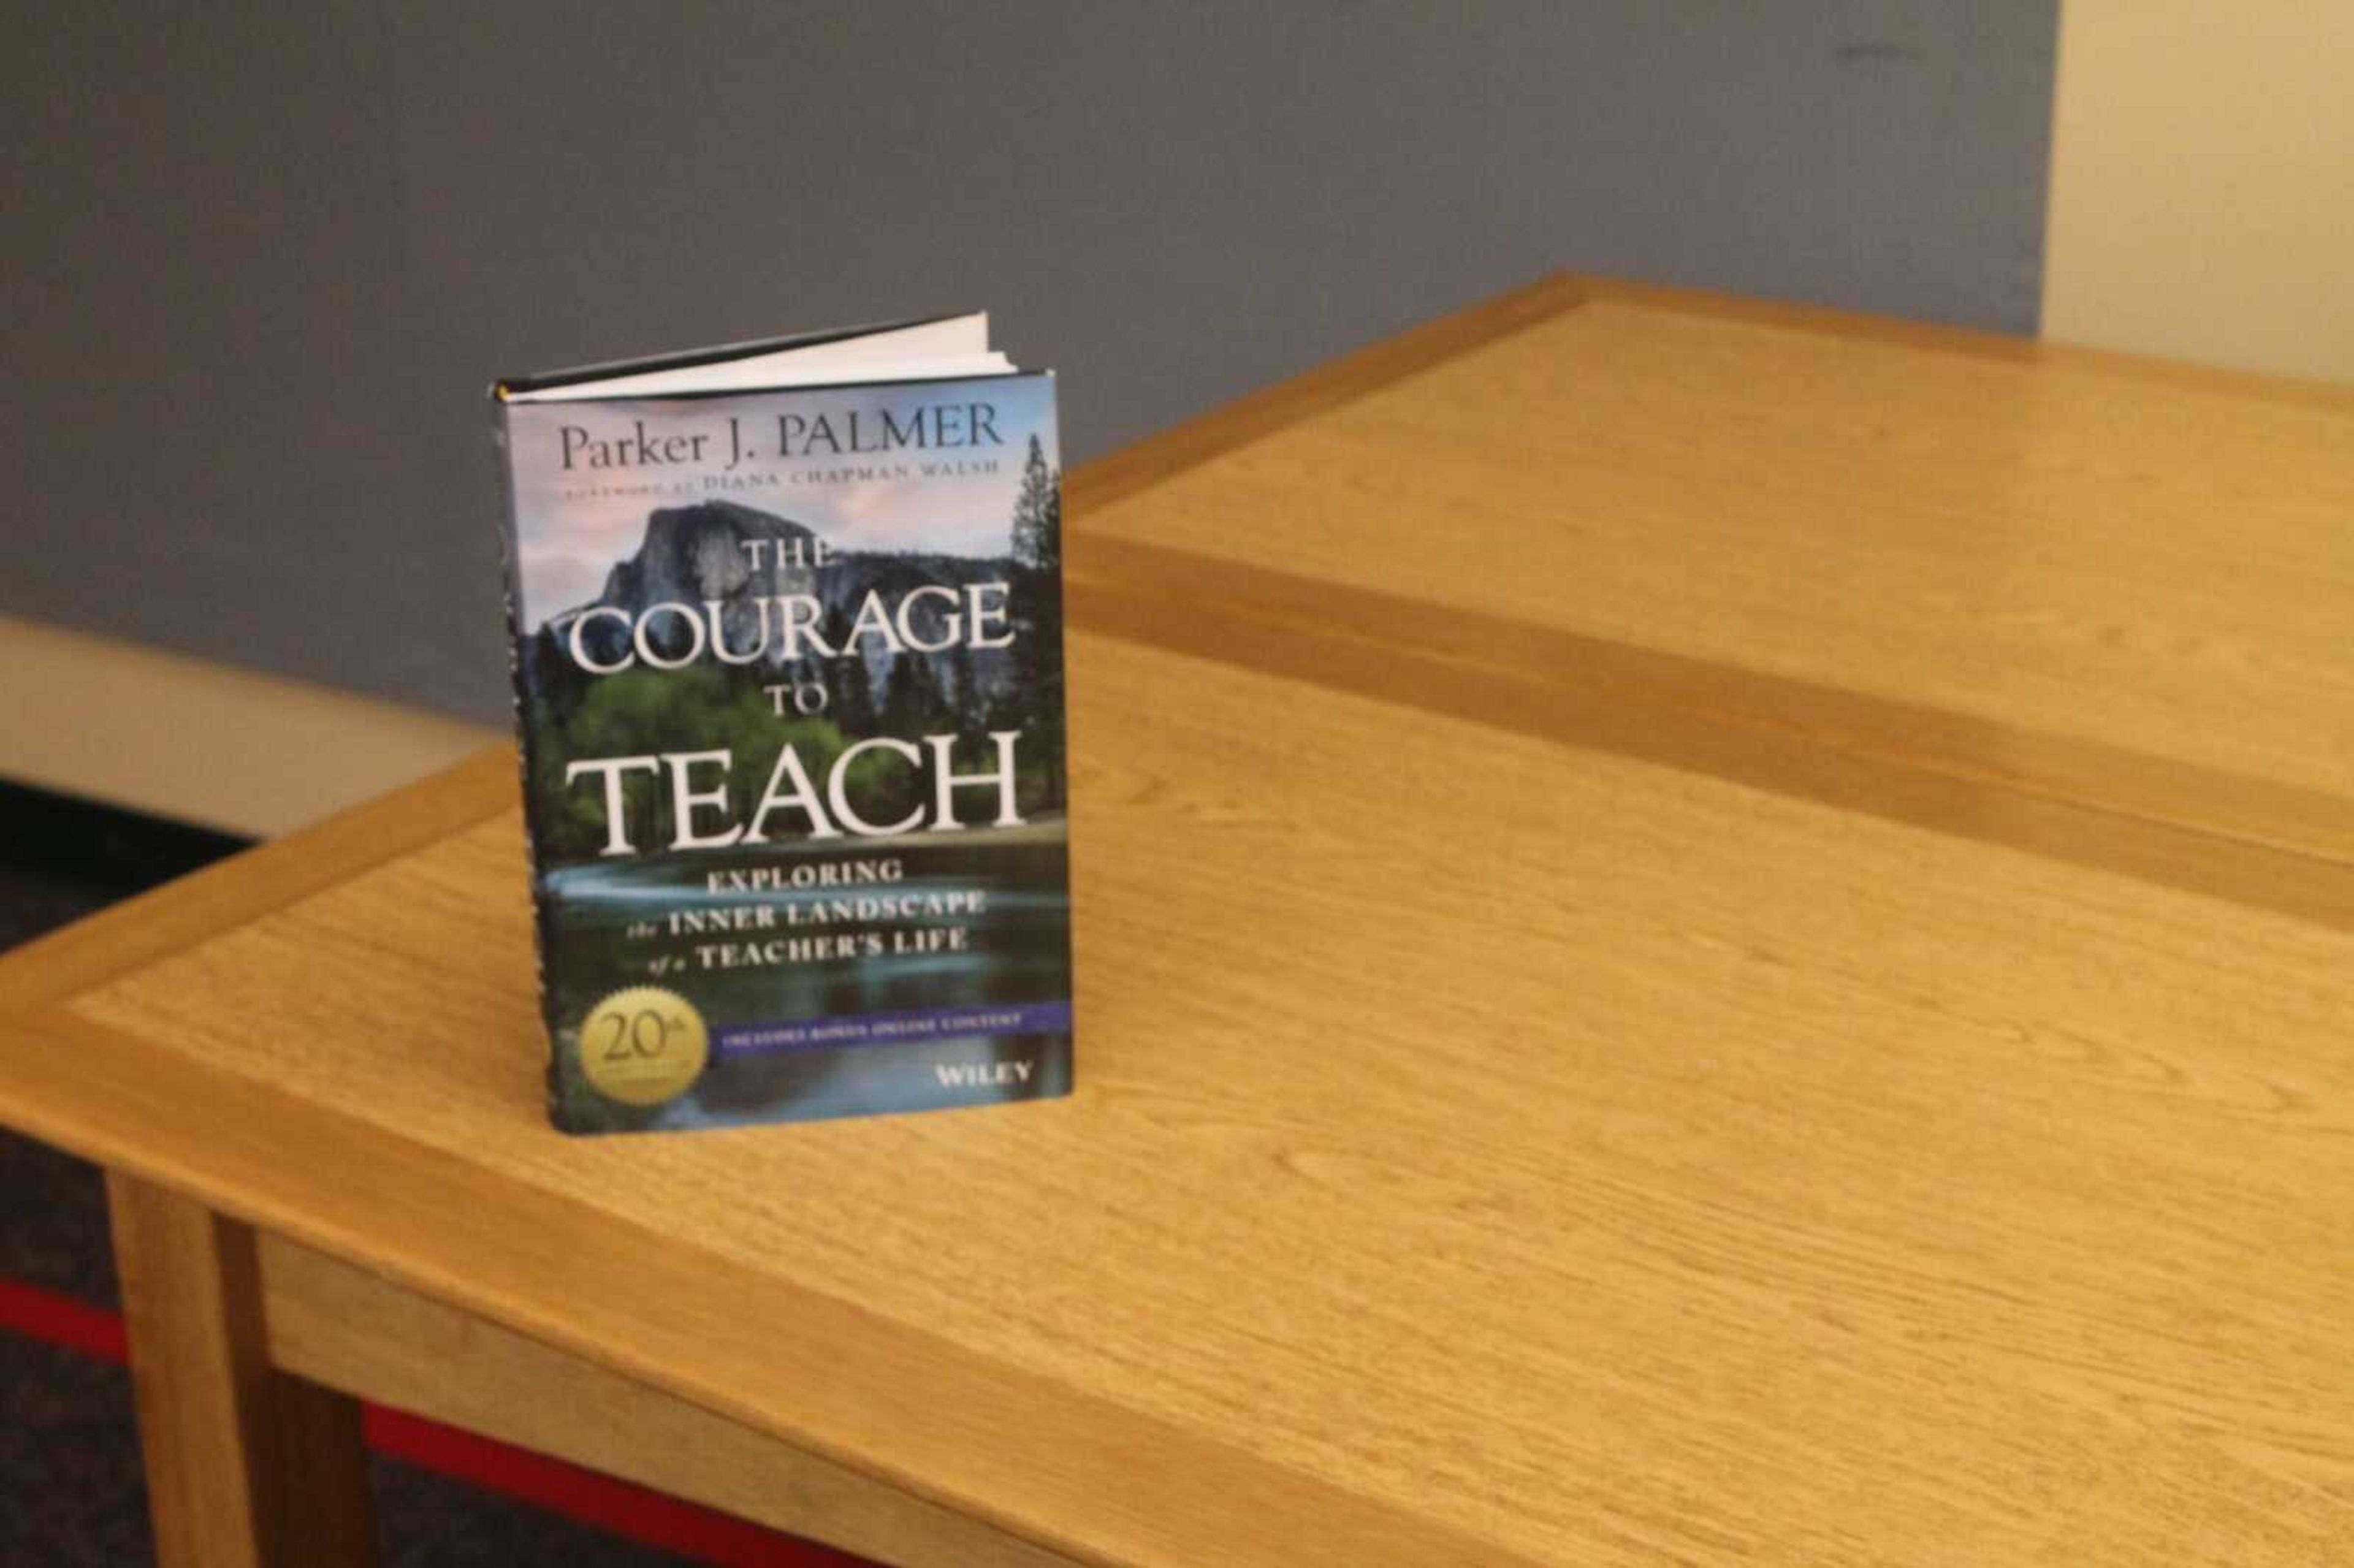 The Courage to Teach by Parker J. Palmer is one of three books being discussed in faculty book studies this semester